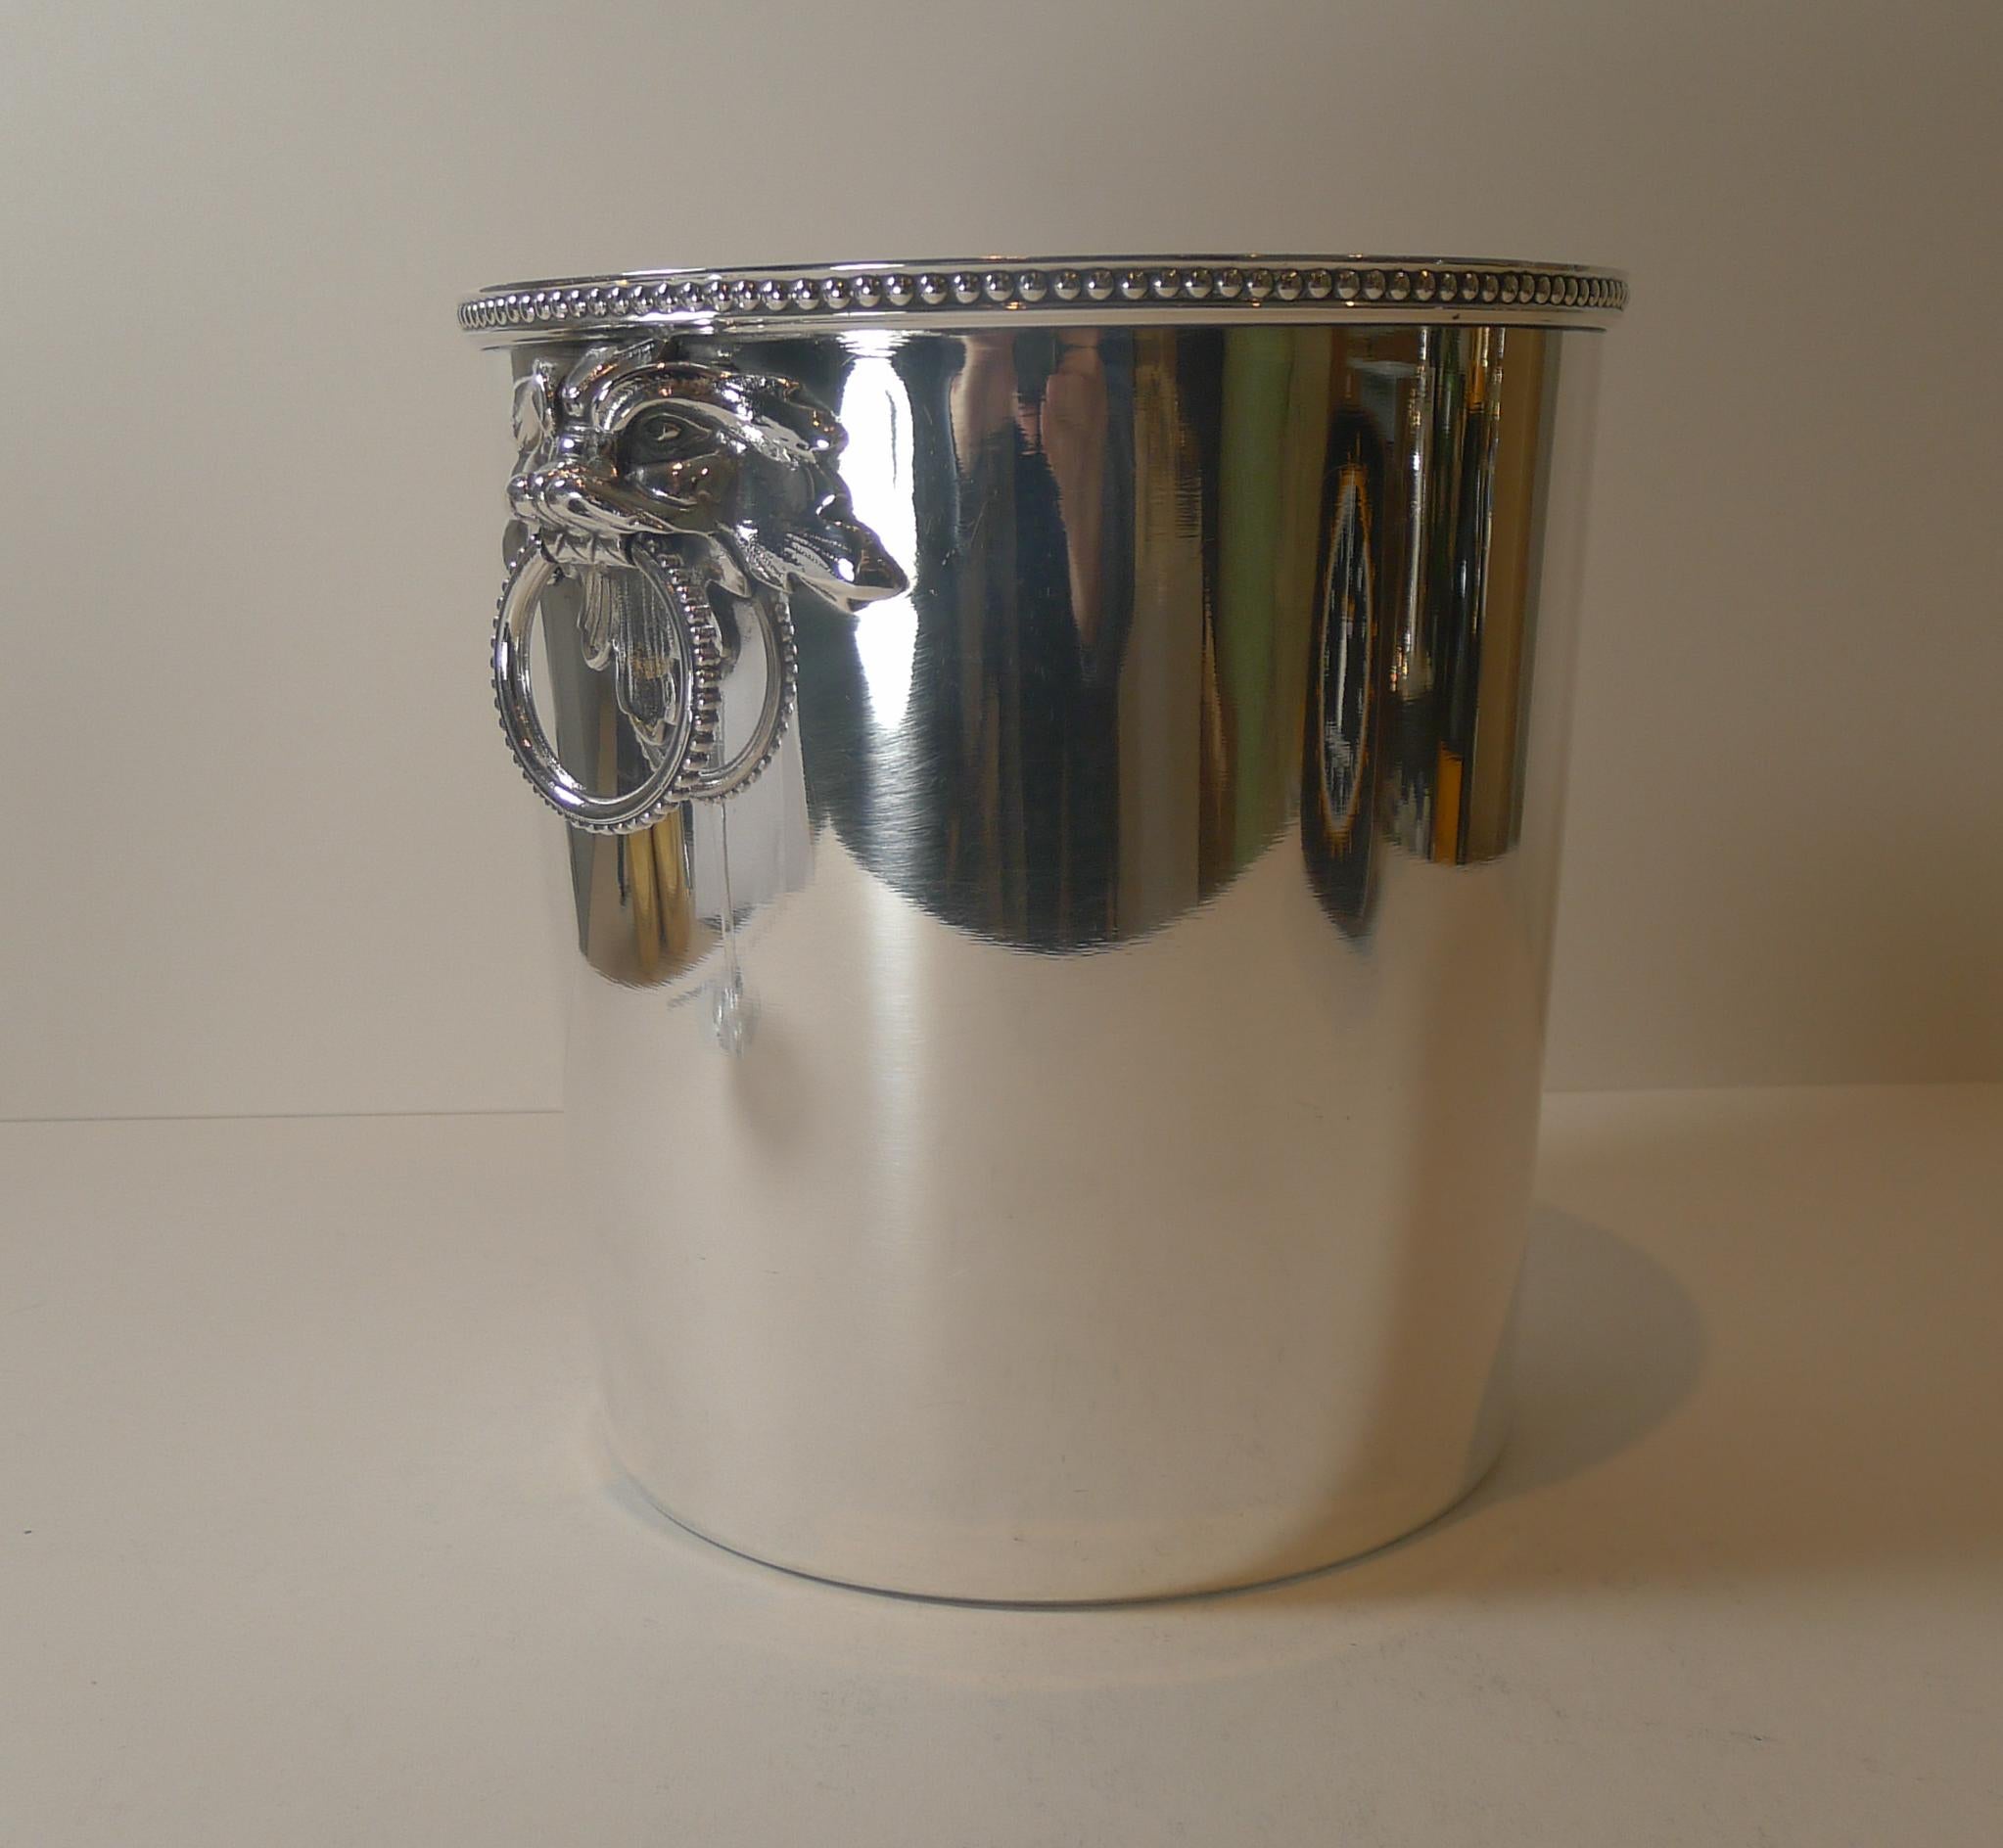 A fabulous French Champagne bucket or wine cooler dating to c.1950; just back from our silversmith's workshop where it has been professionally cleaned and polished, restoring it to it's former glory.

A scarcely seen design with a beaded border